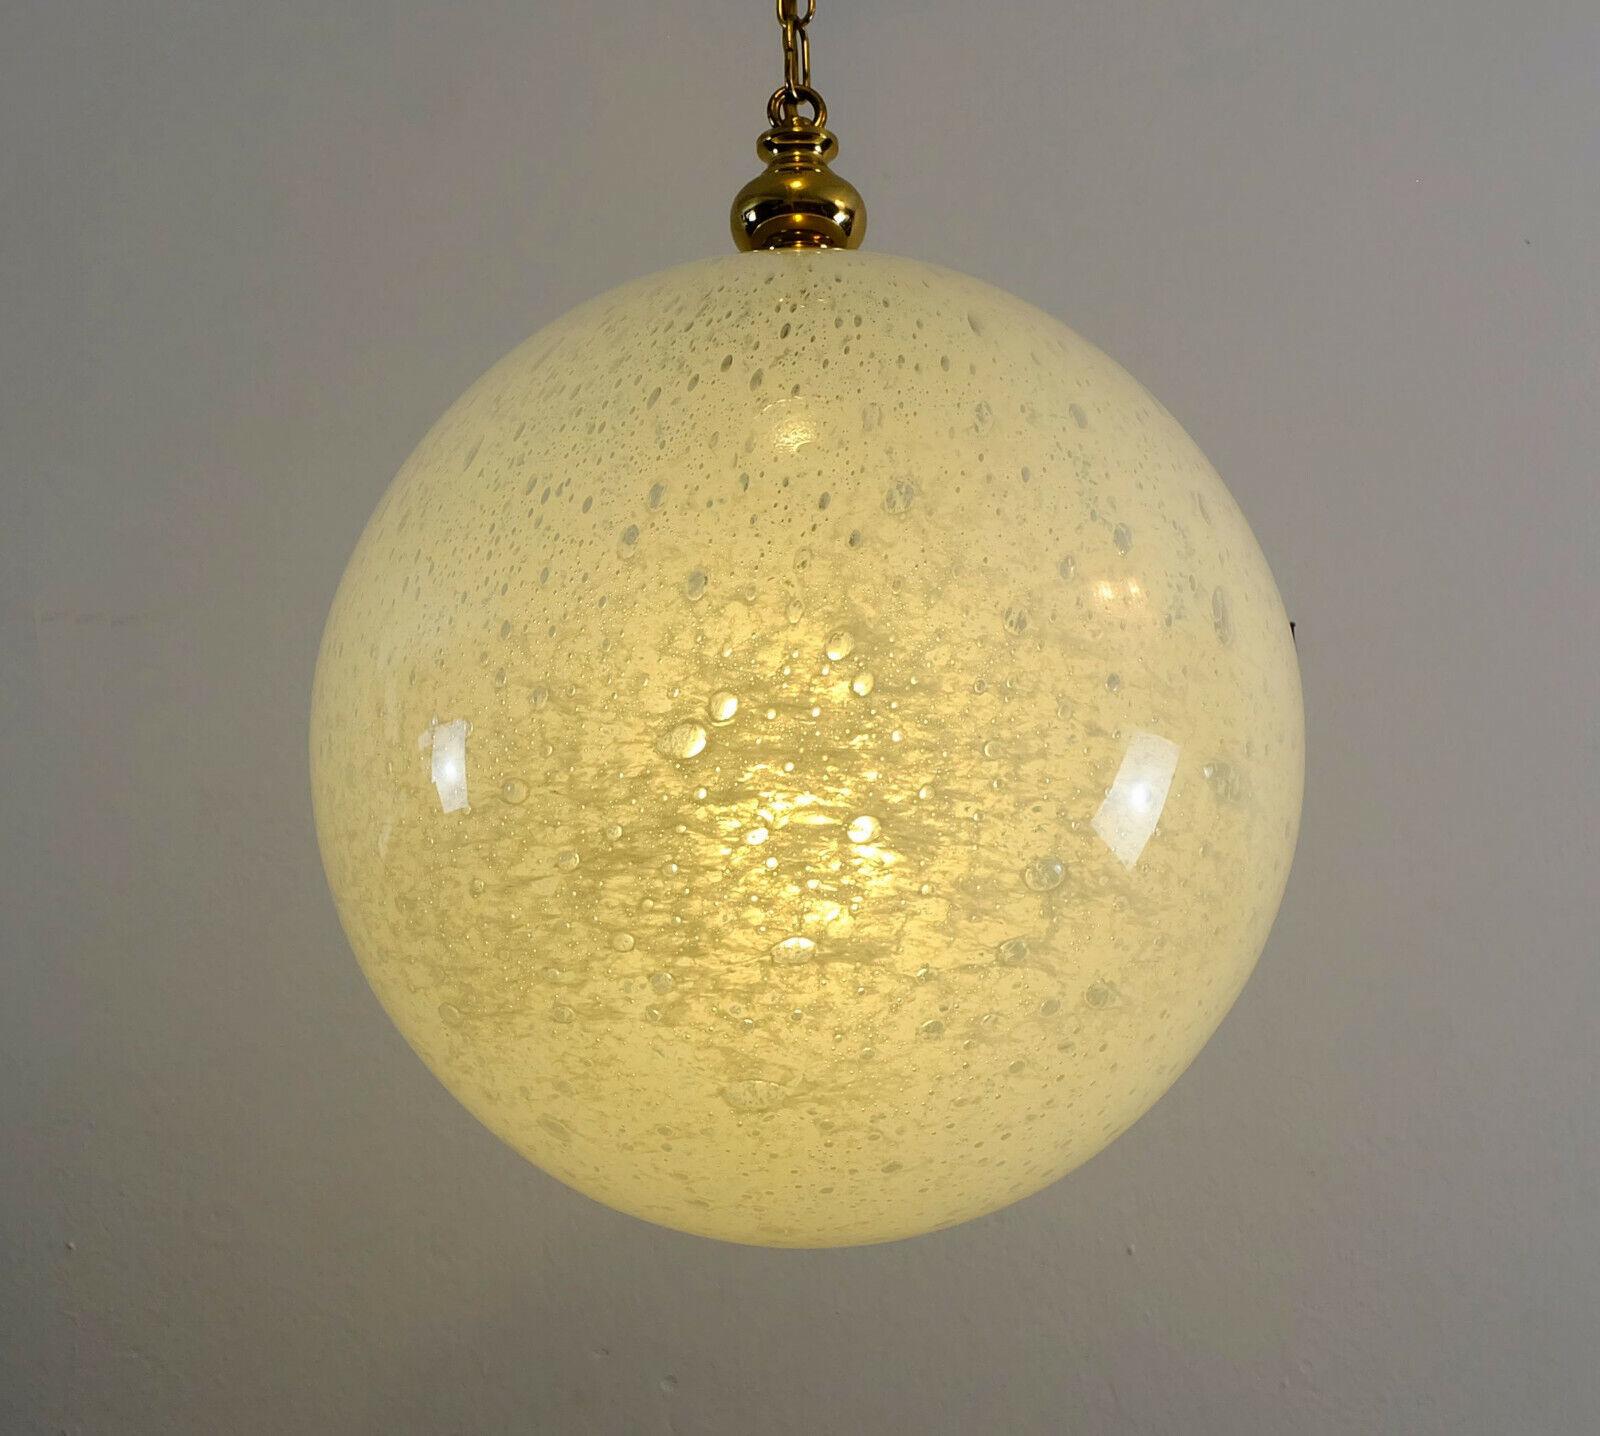 Very beautiful and elegant 1960s 1970s pendant light. Manufactured by Doria-Leuchten. The shade is made of white glass with bubble structure, like soap foam, which can be seen on the detail picture. The base and the chain are made of brass. For 1